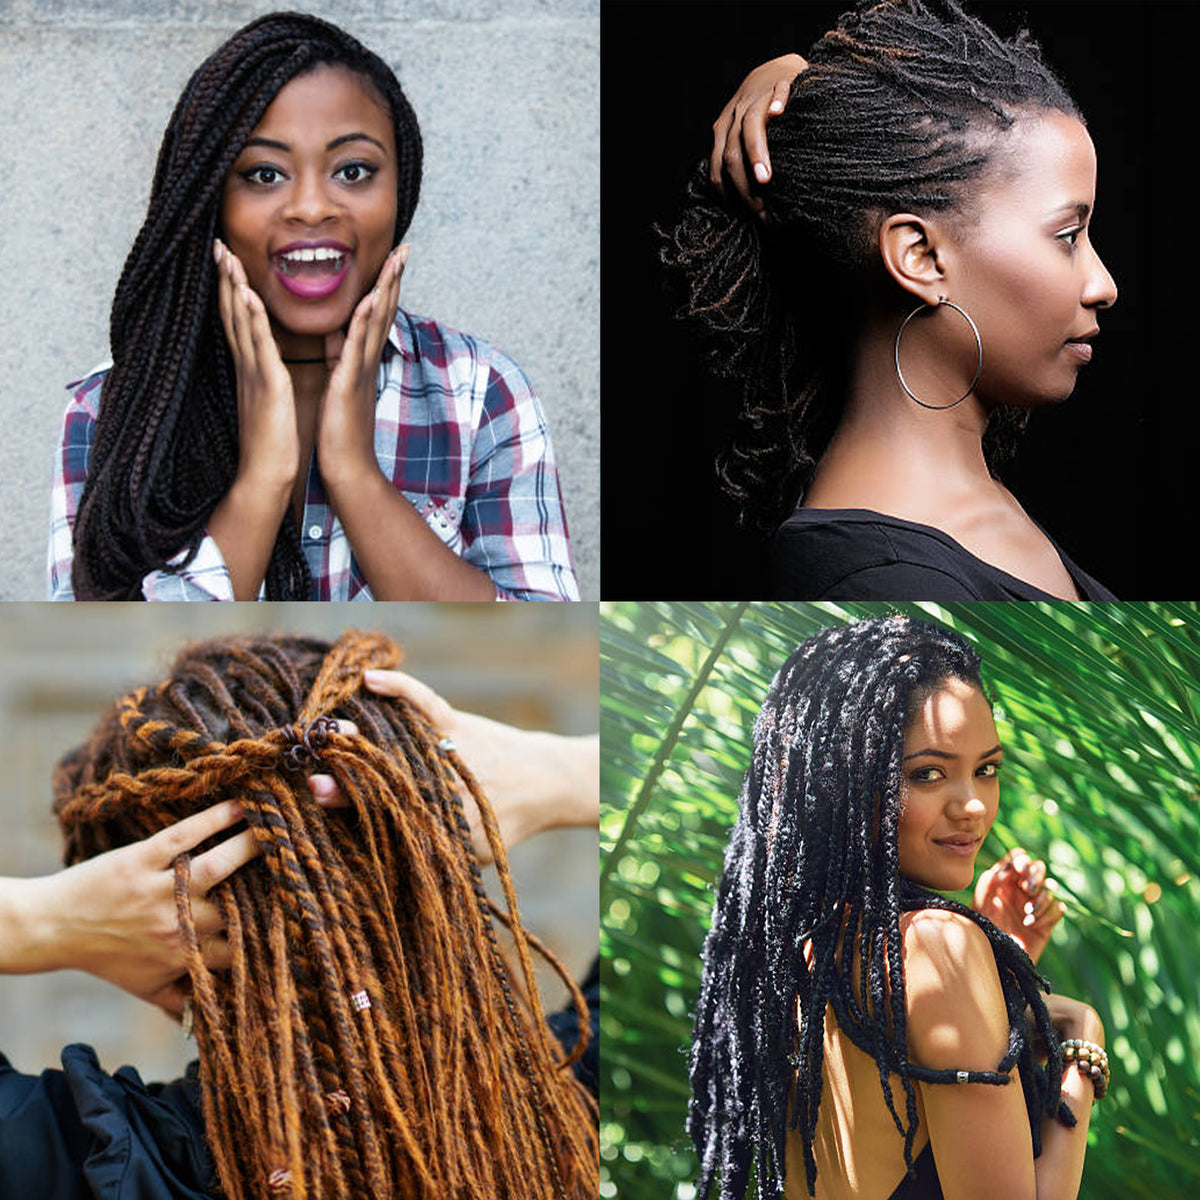 100% Human Hair Dreadlock Extensions 8 inch 5 Strands Handmade Natural Loc Extensions Human Hair Bundle Dreads Extensions For Woman & Men Can Be Dyed/Bleached  (8 Inch 5 Strands, 0.4cm Natural Black)